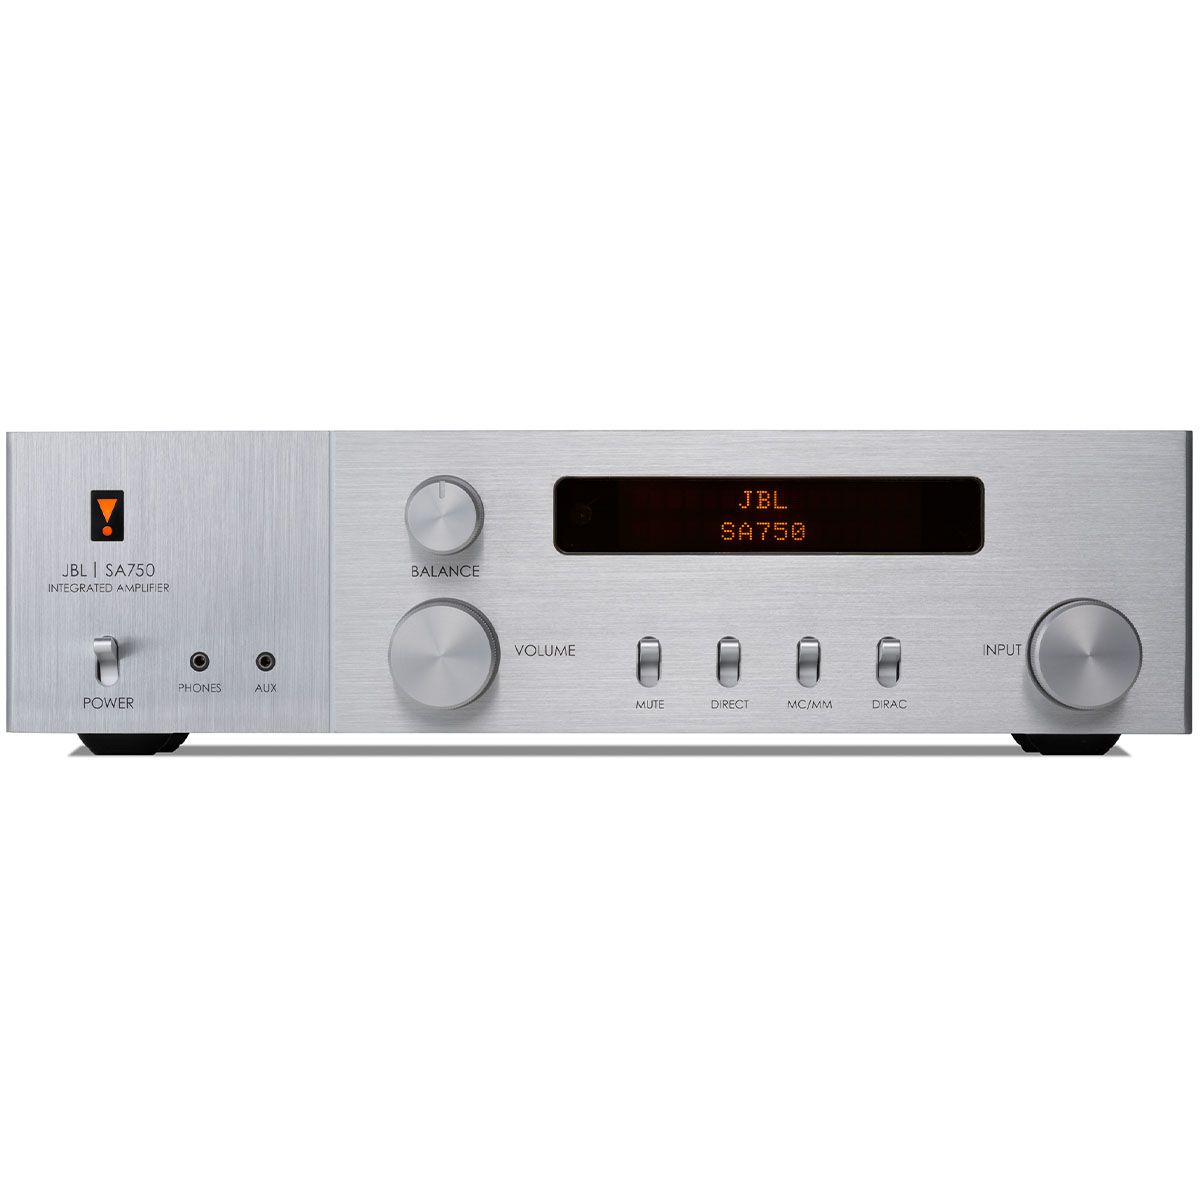 JBL SA750 Streaming Integrated Stereo Amplifier - Walnut front view